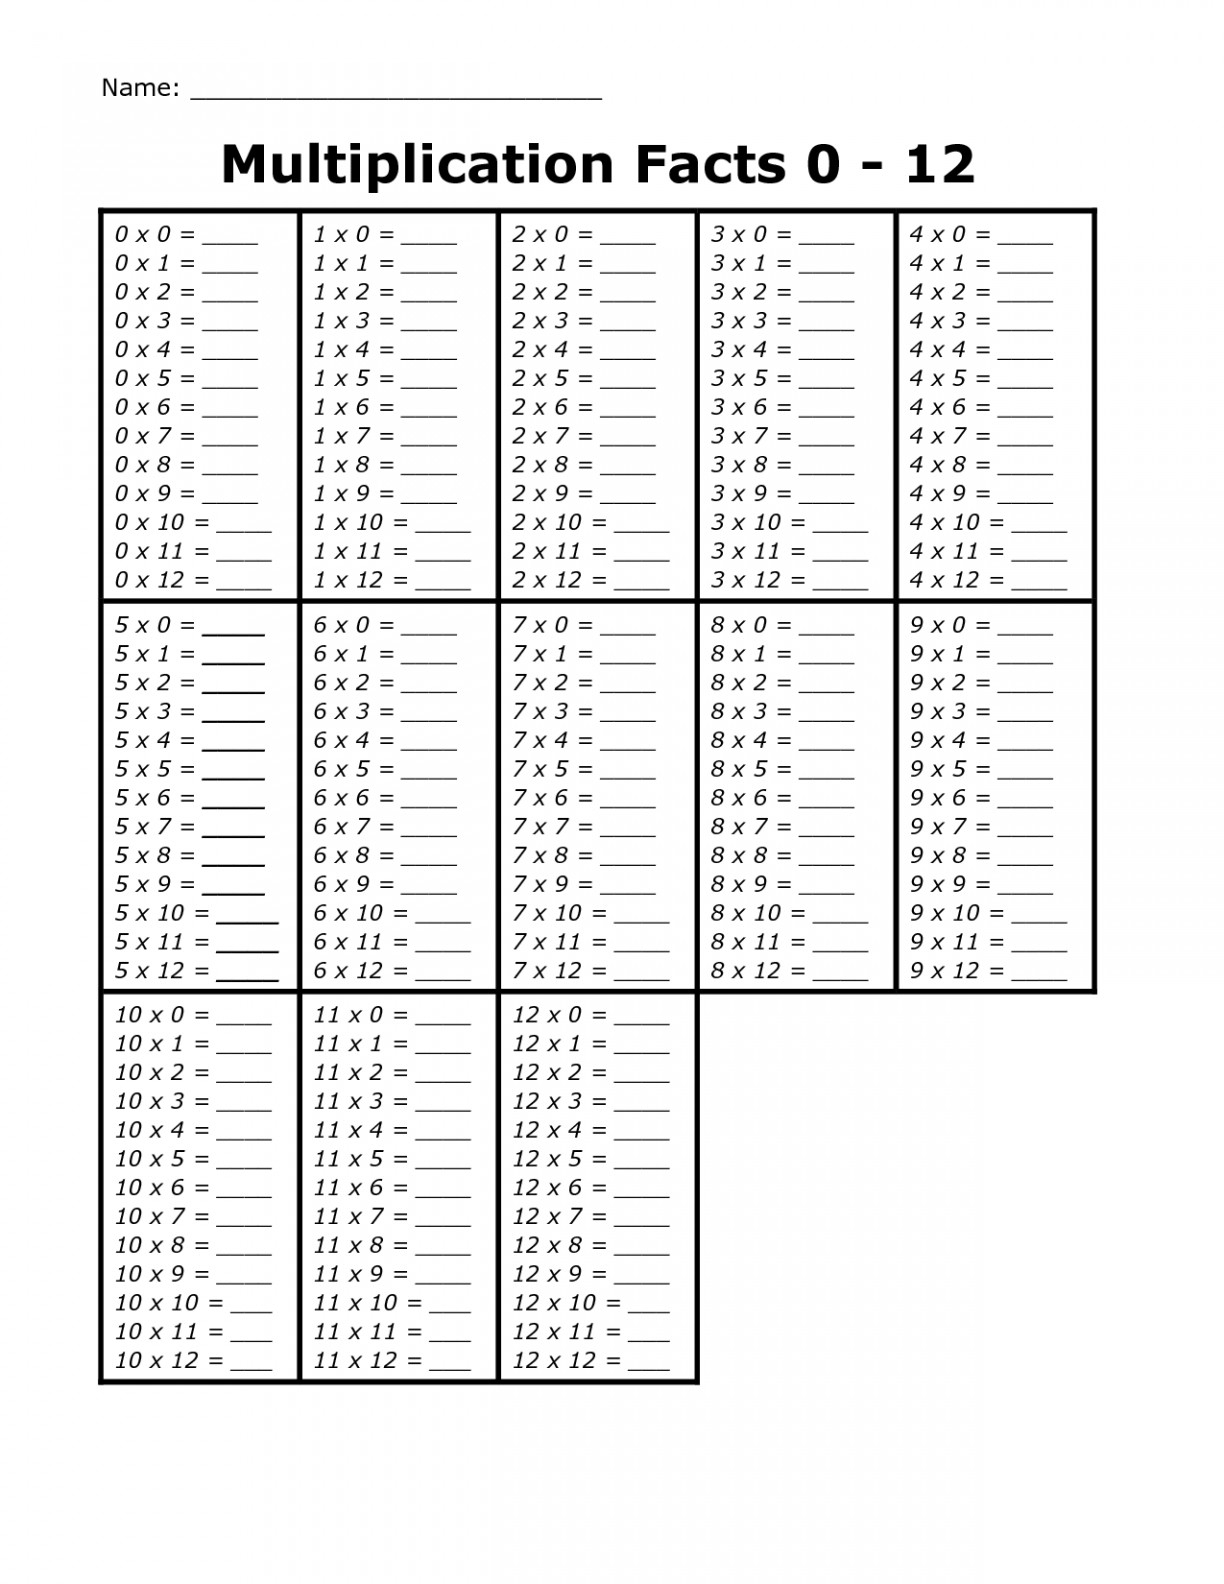 12 Fun Blank Multiplication Charts For Kids | Kittybabylove pertaining to Printable Blank Multiplication Chart 0-12